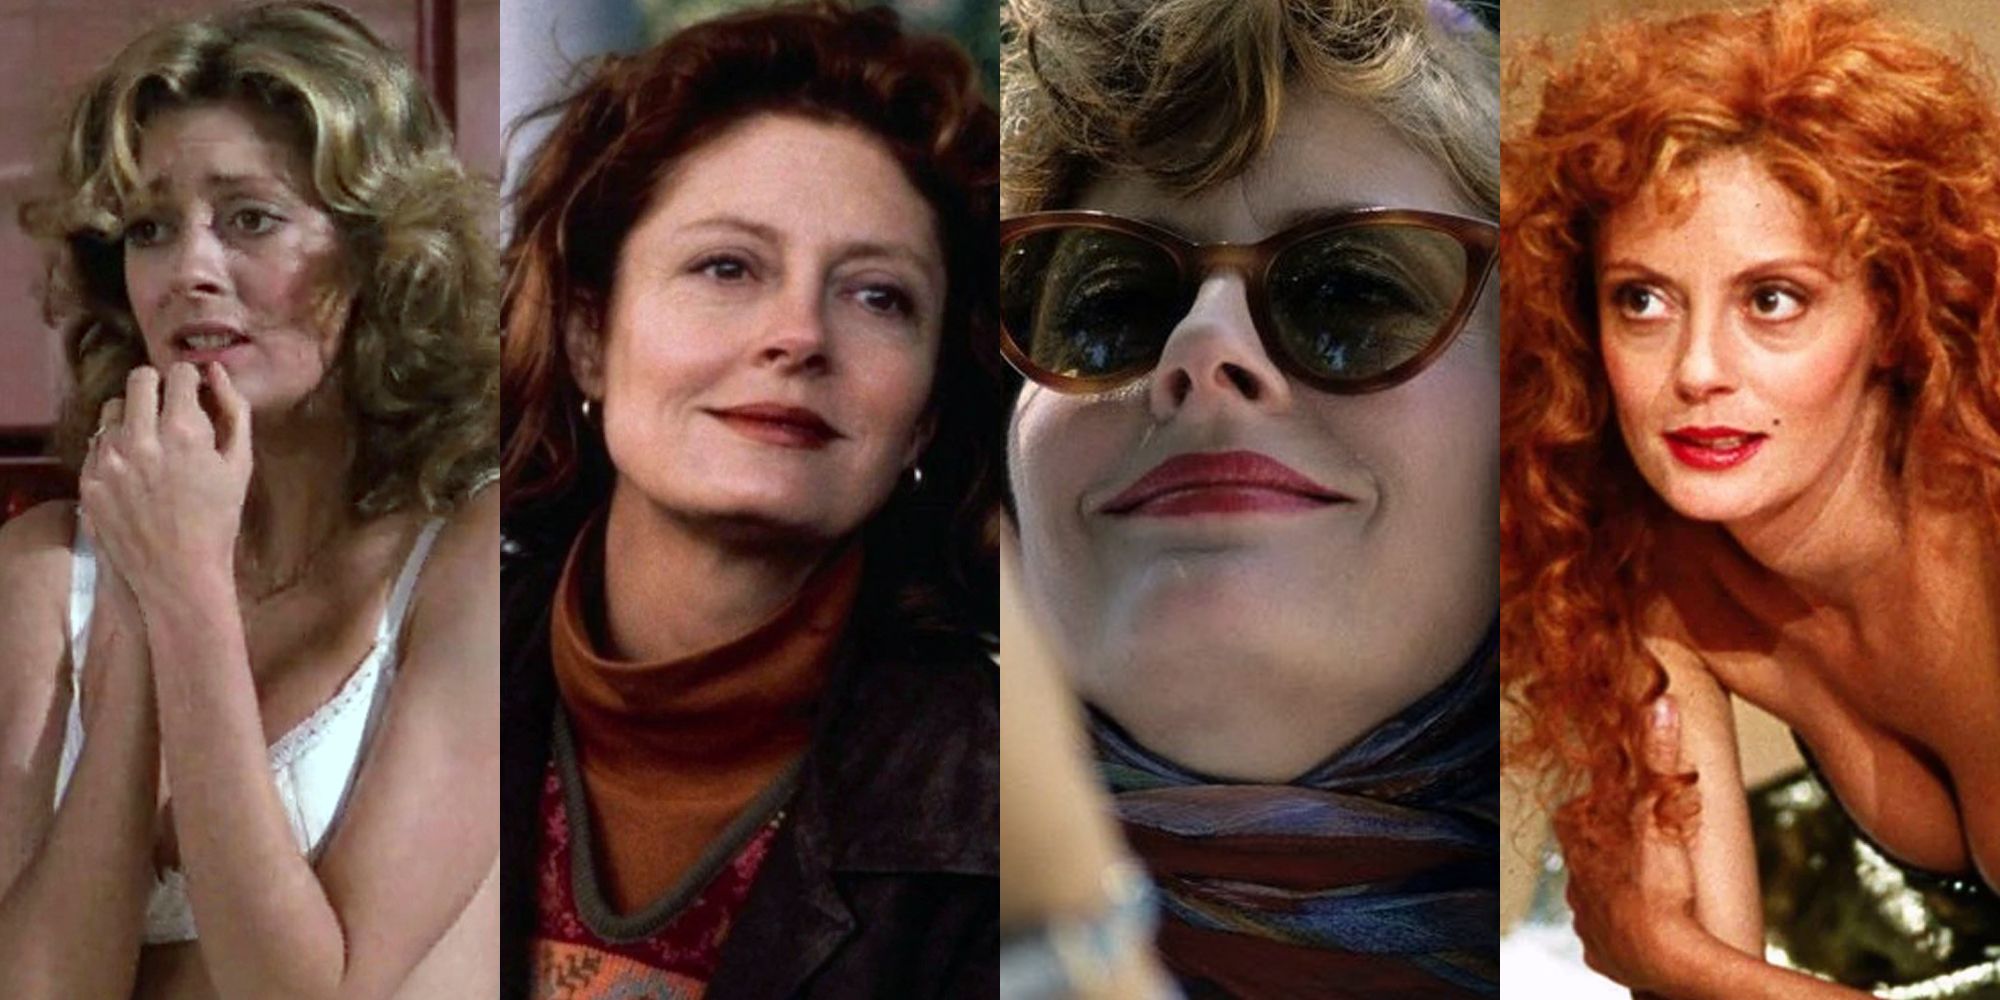 Susan Sarandon is the only actress to make it to the most prolific actor list